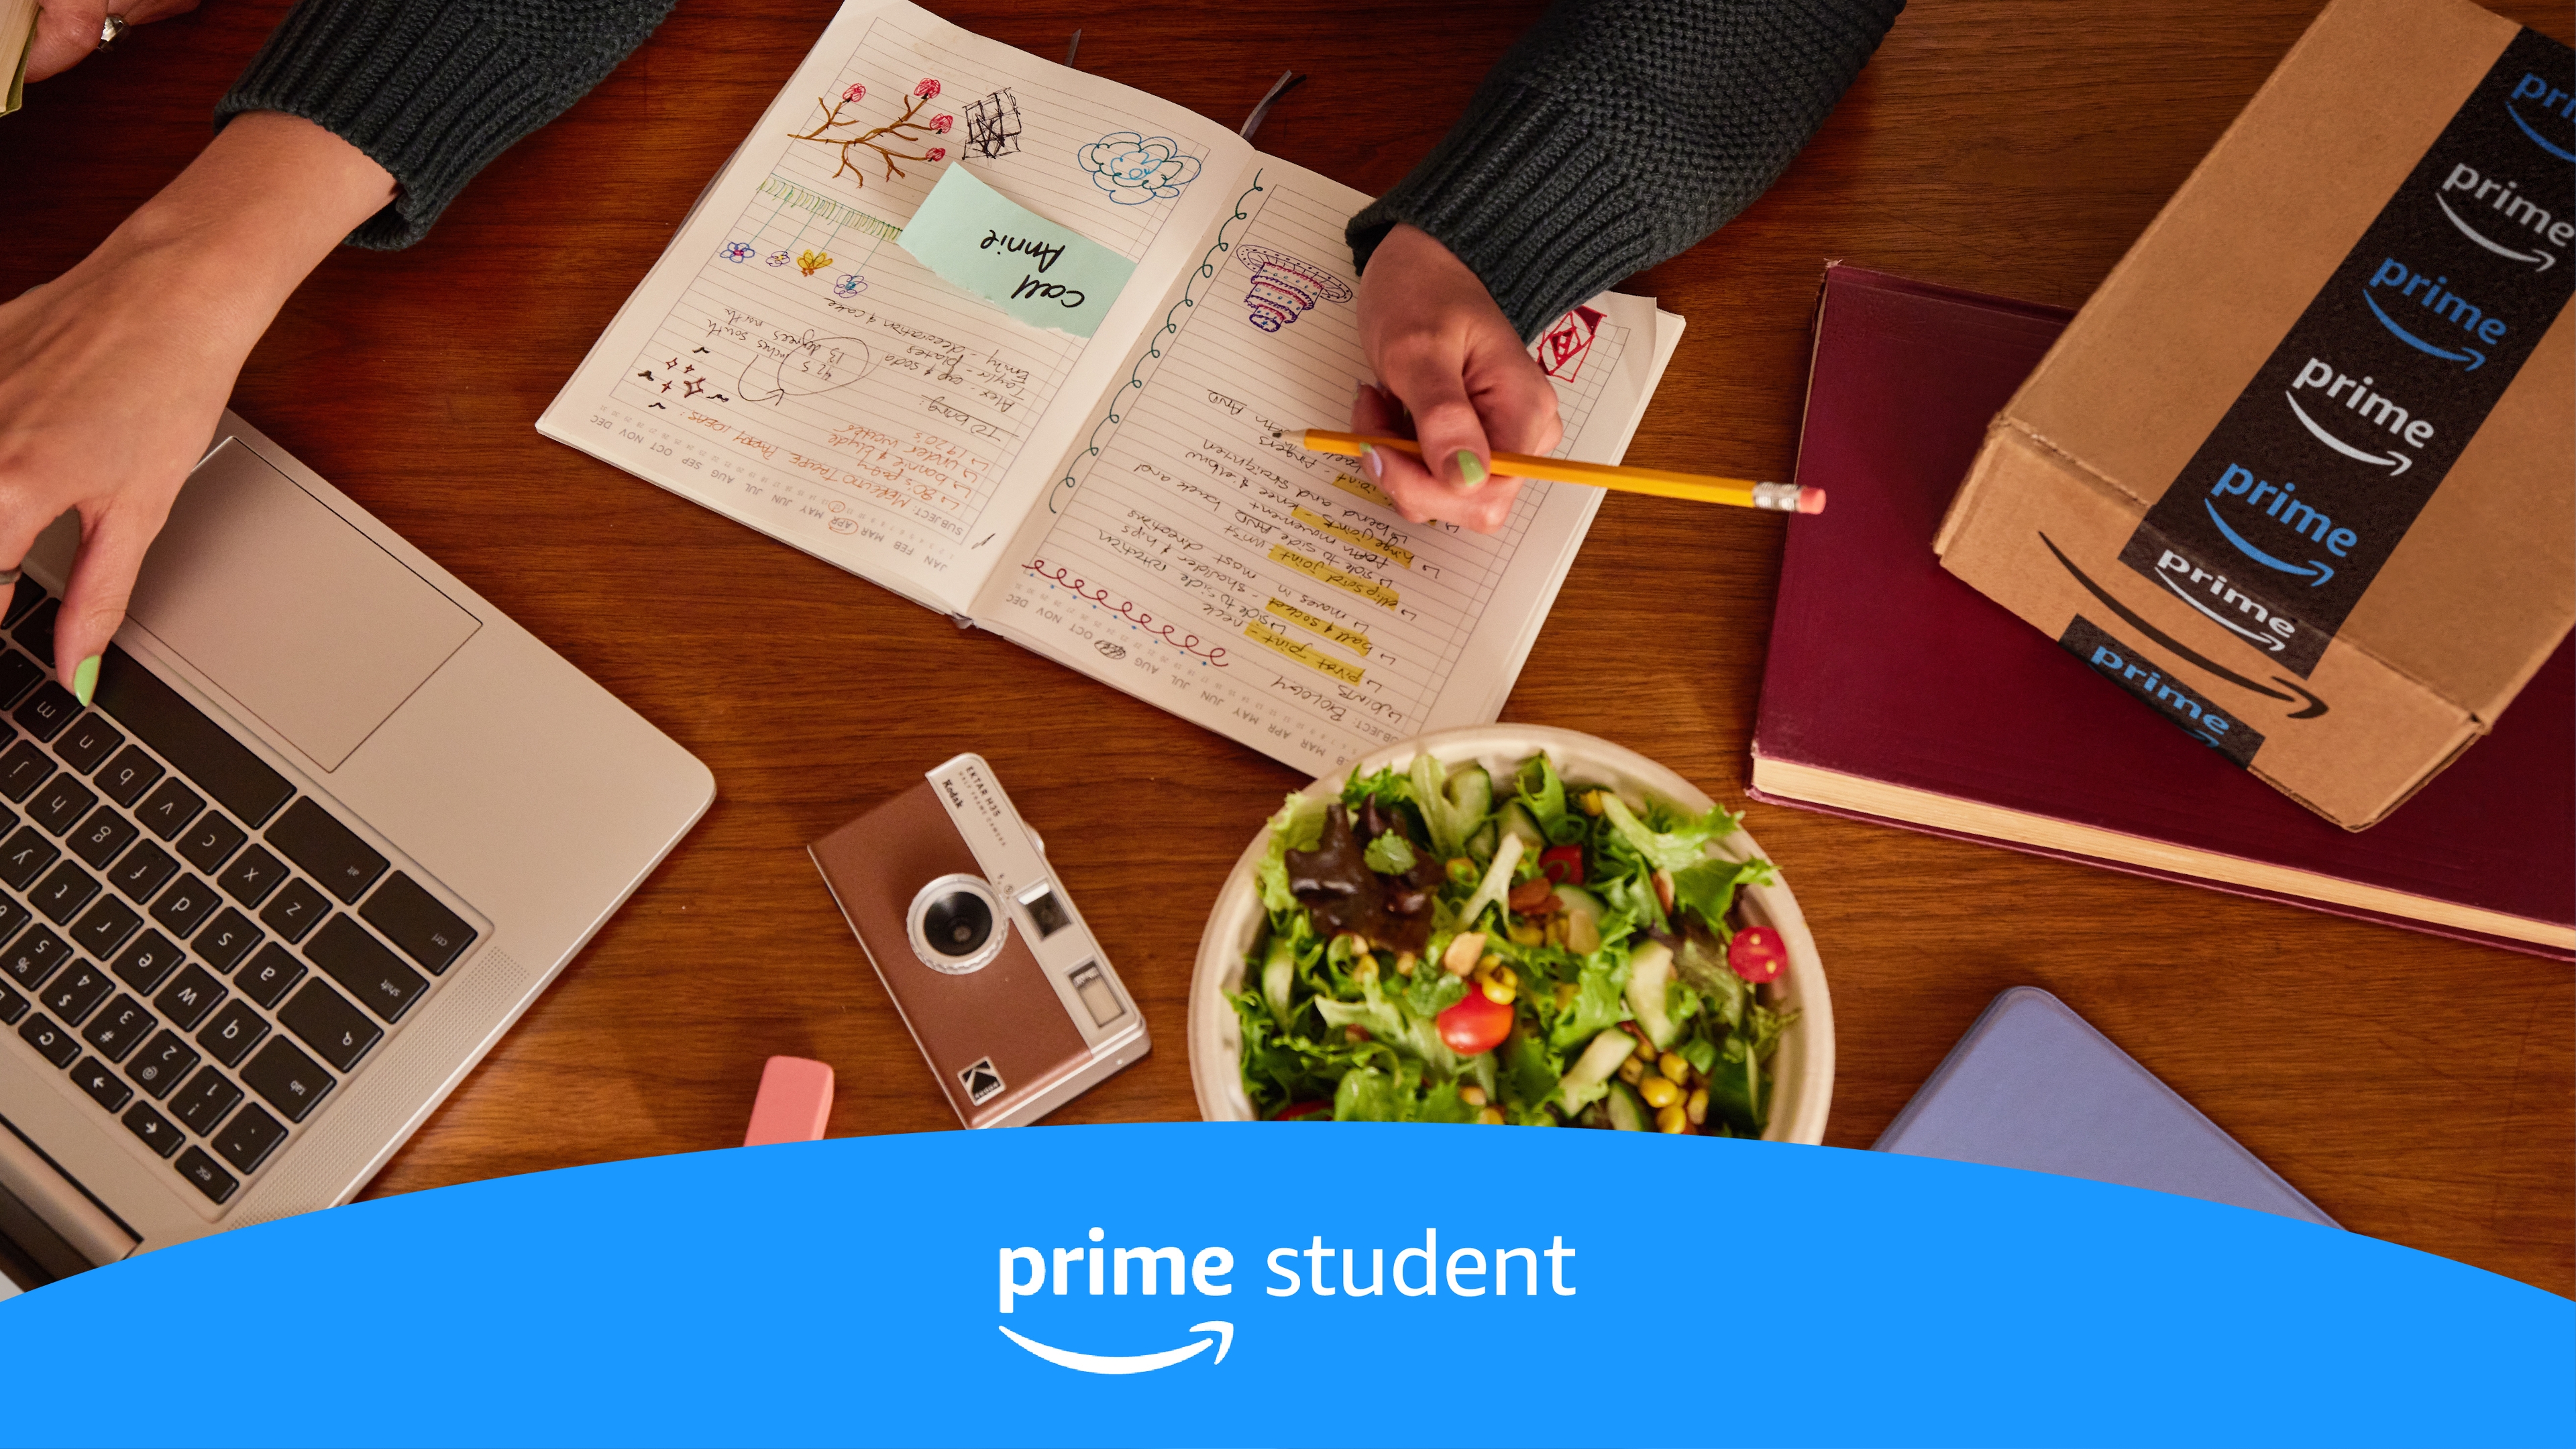 Image of a student studying with her notebook, camera, salad, and Amazon Prime delivery box on her desk.